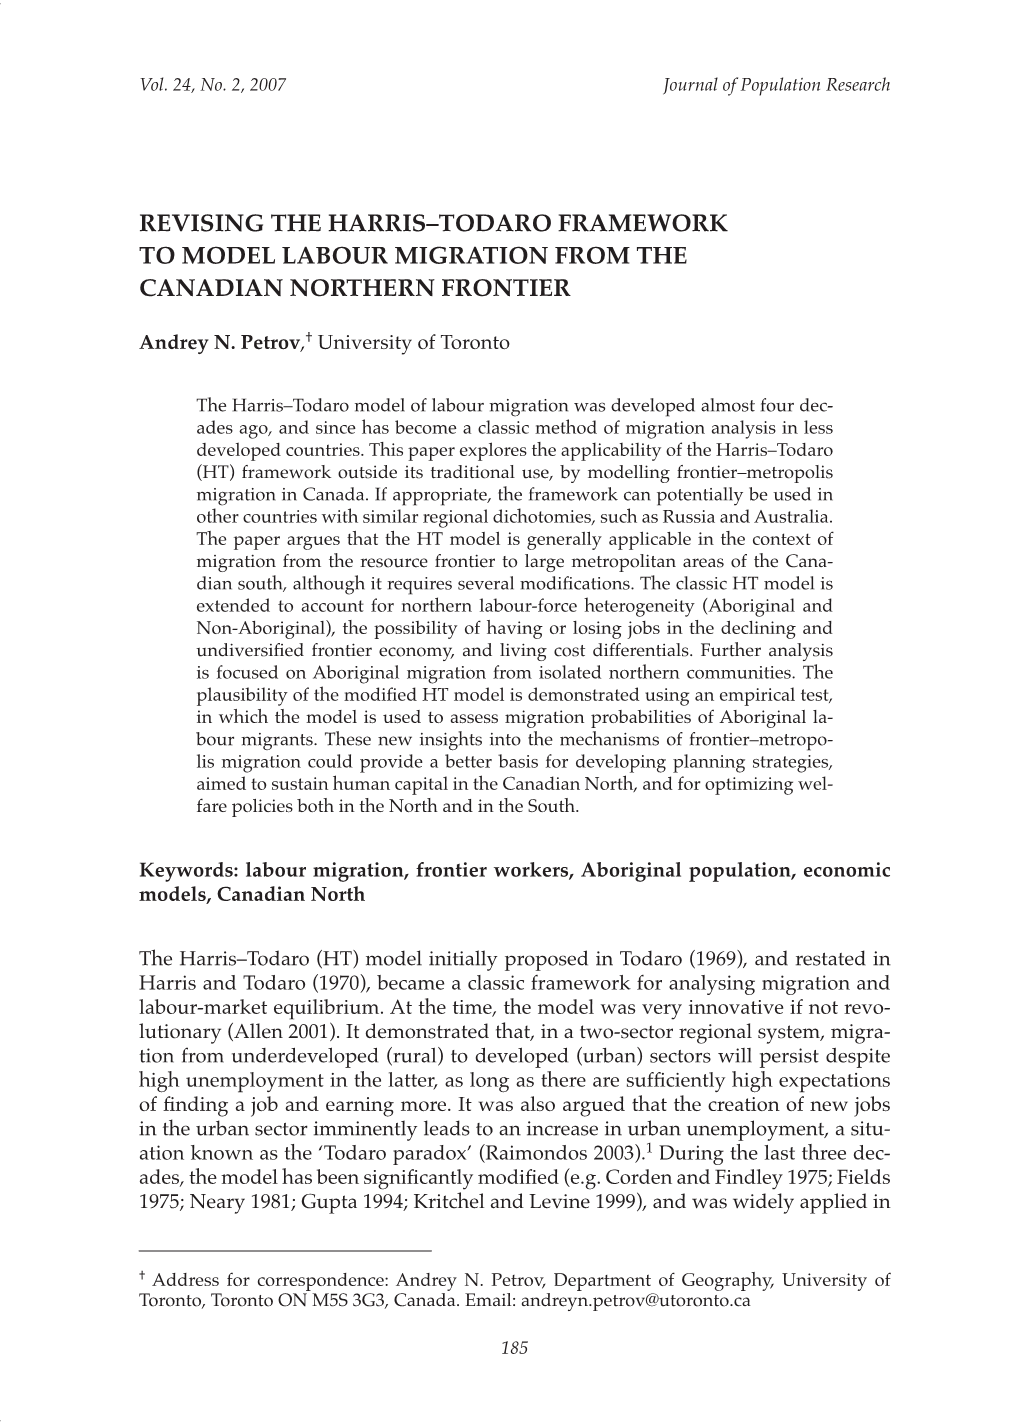 Revising the Harris–Todaro Framework to Model Labour Migration from the Canadian Northern Frontier